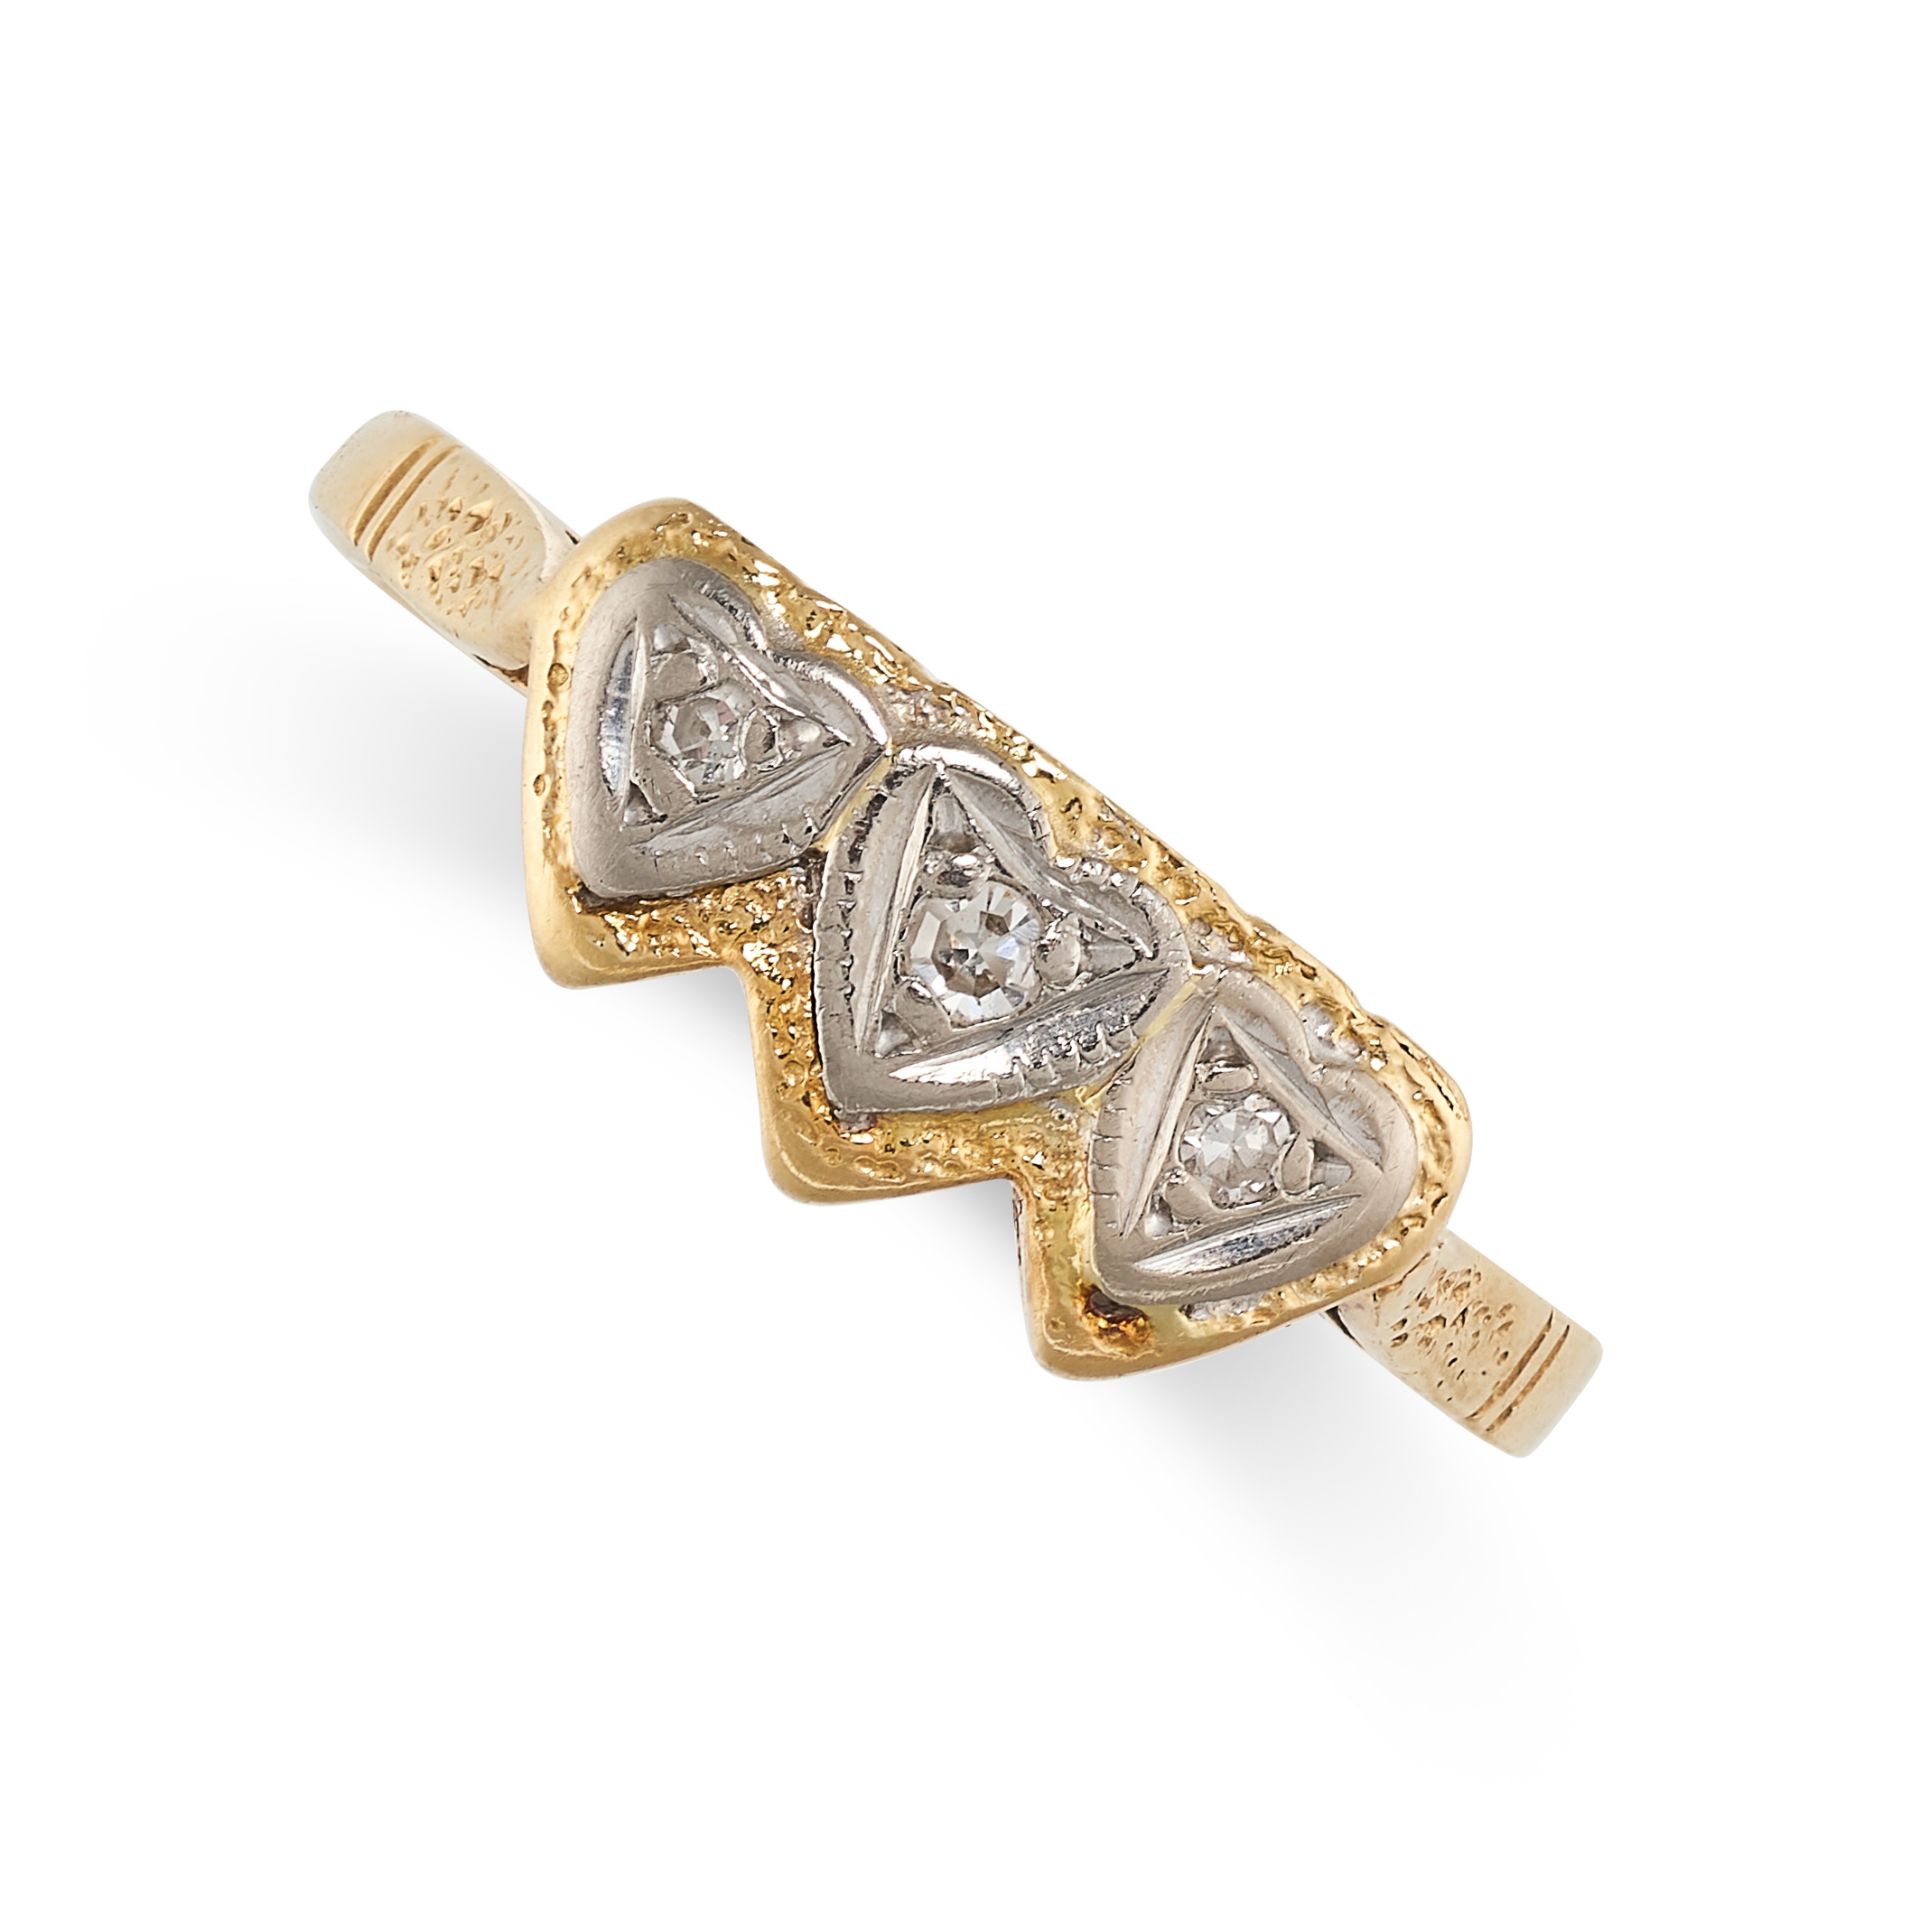 A VINTAGE DIAMOND SWEETHEART DRESS RING, 1994 in 18ct yellow gold, the band with a trio of hearts,